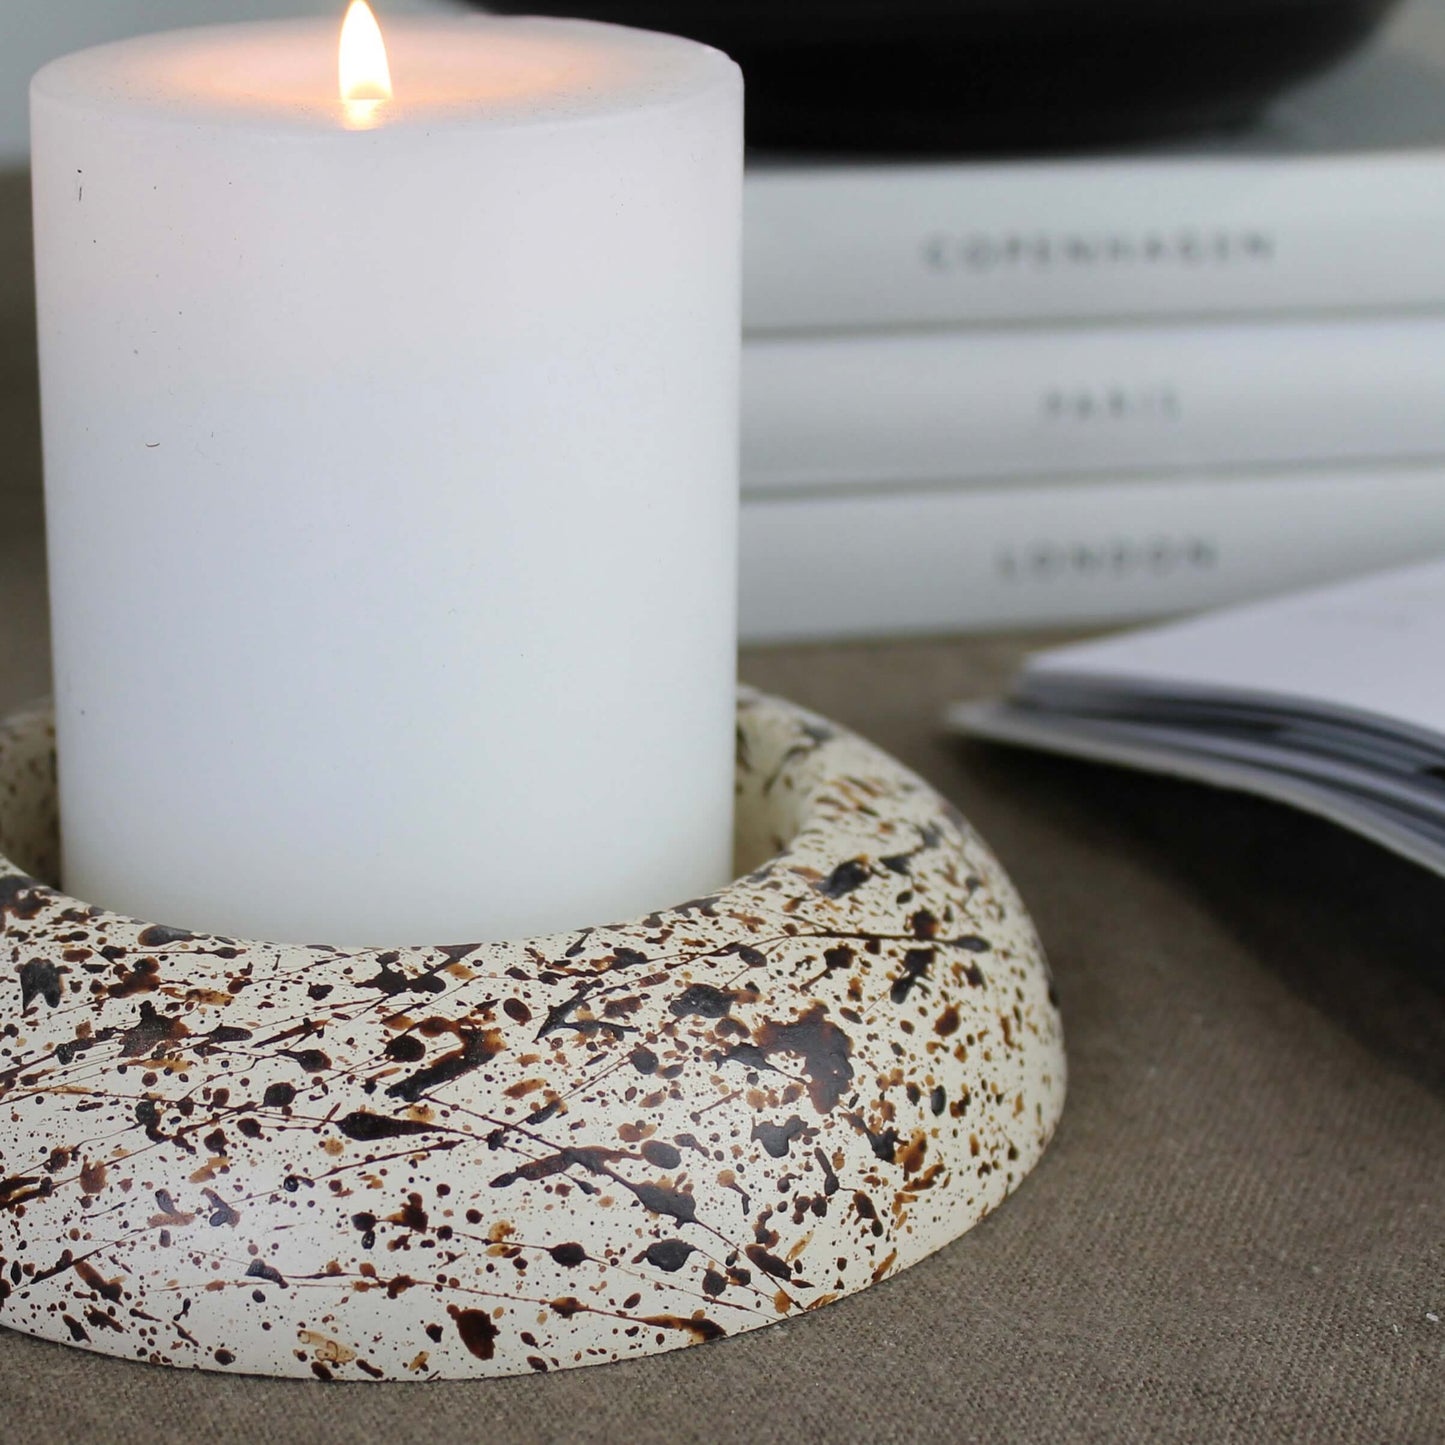 Brown and Cream Splattered Pattern Dome Shaped Concrete Pillar Candle Holder